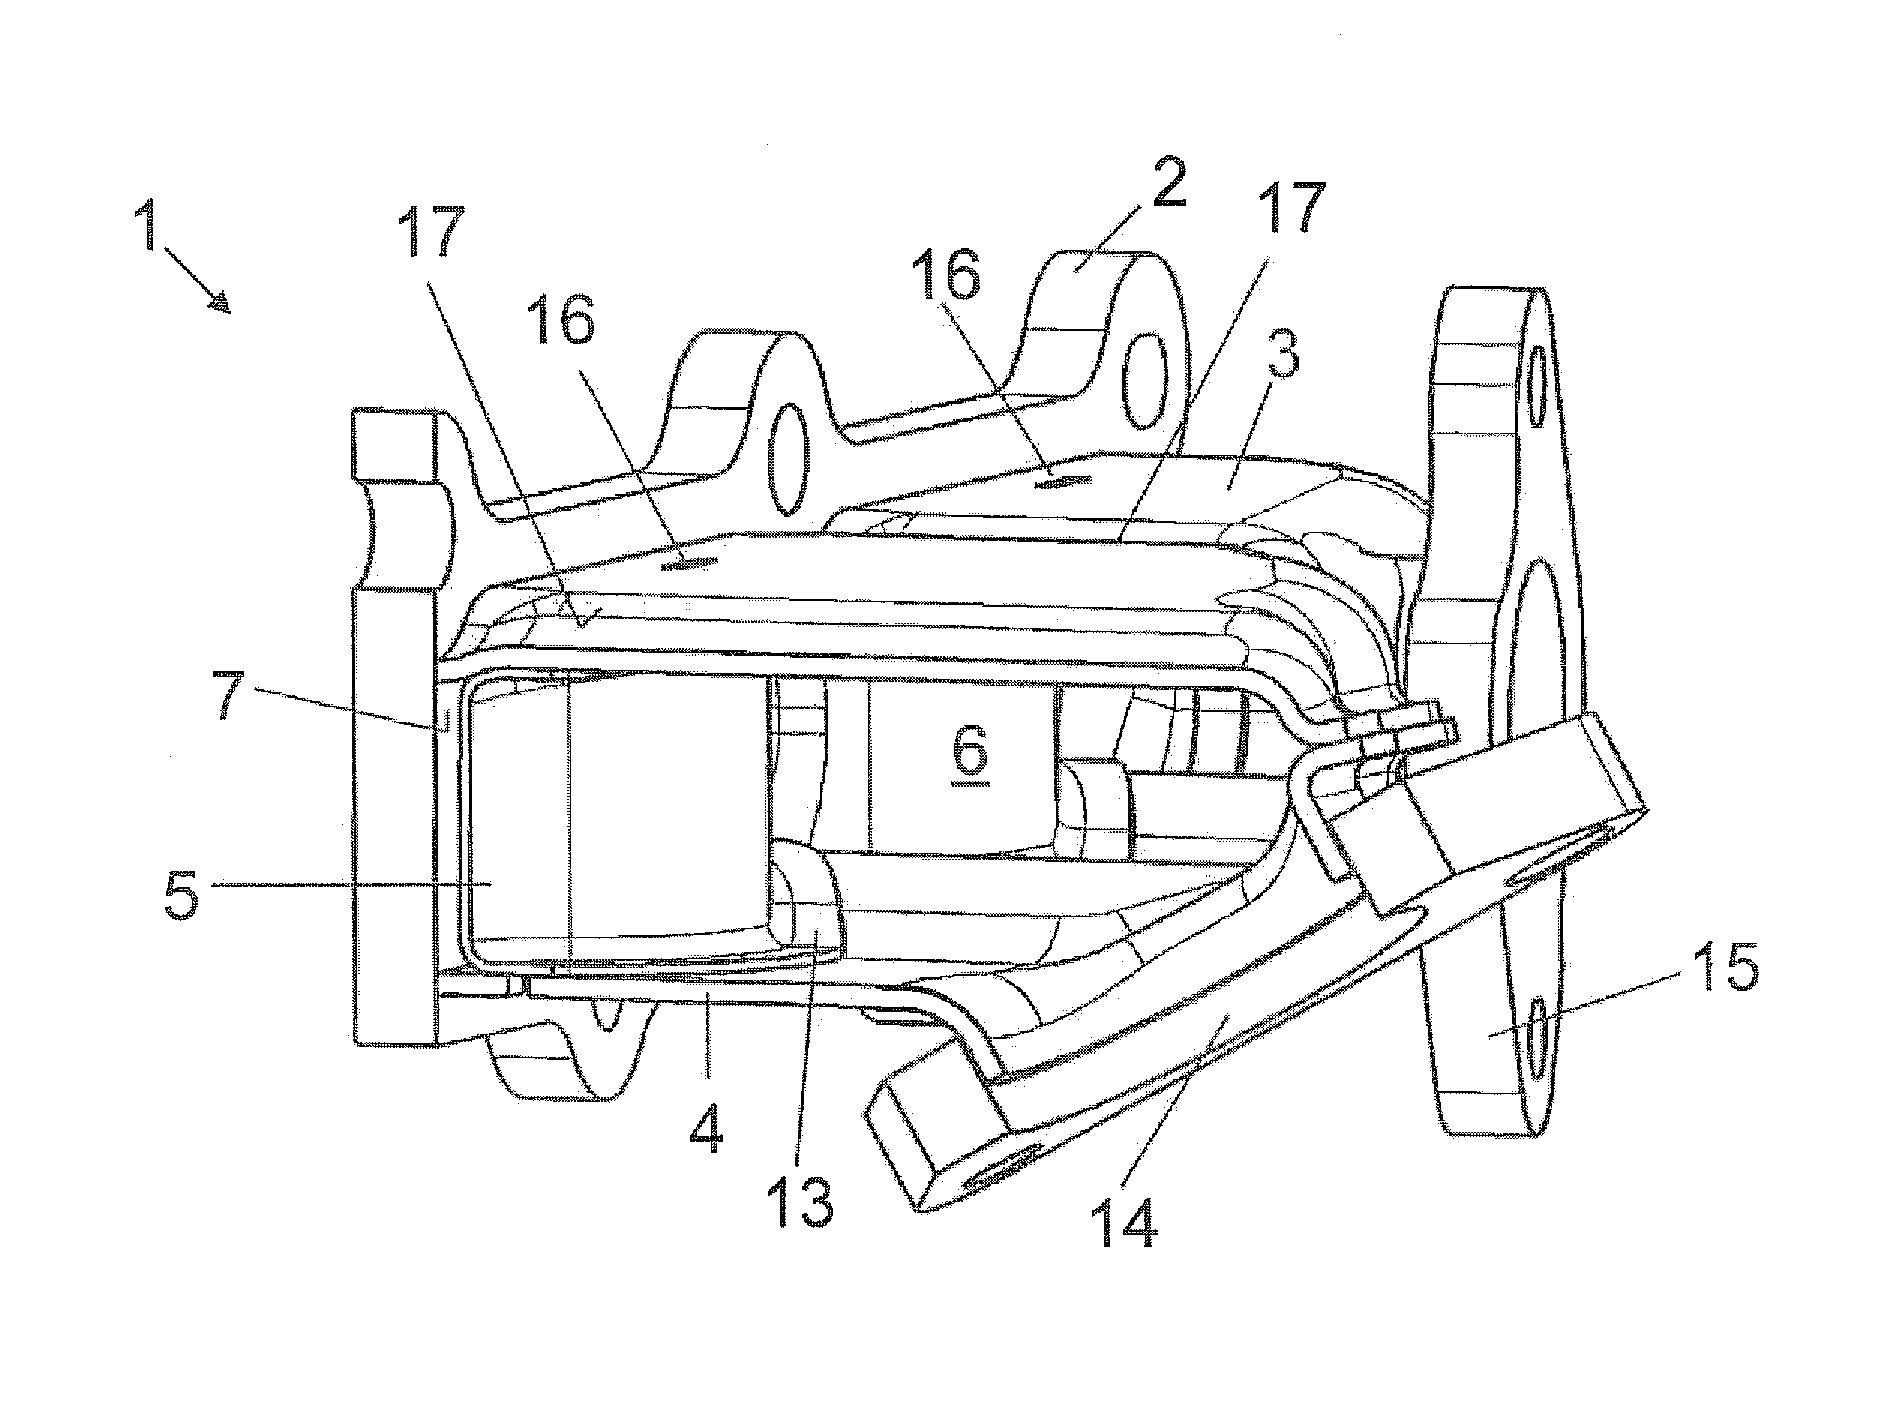 Exhaust manifold with baffle plate